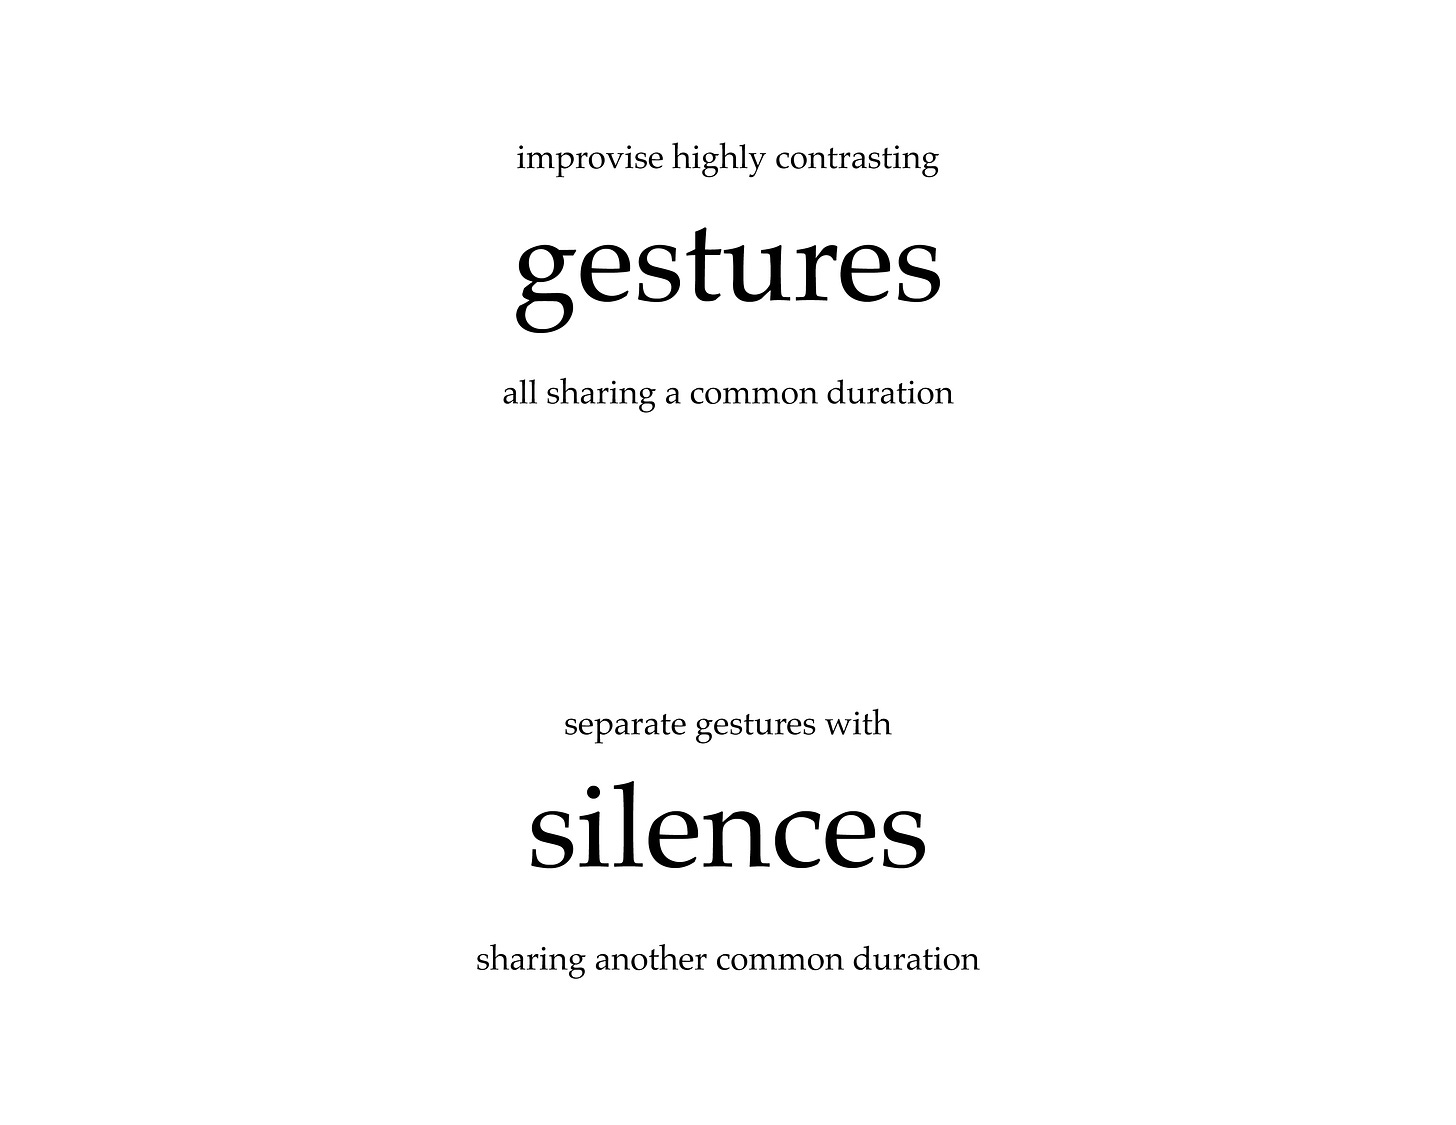 graphically styled text, reading: "improvise highly contrasted gestures, all sharing a common duration. separate gestures with silences, sharing another common duration"